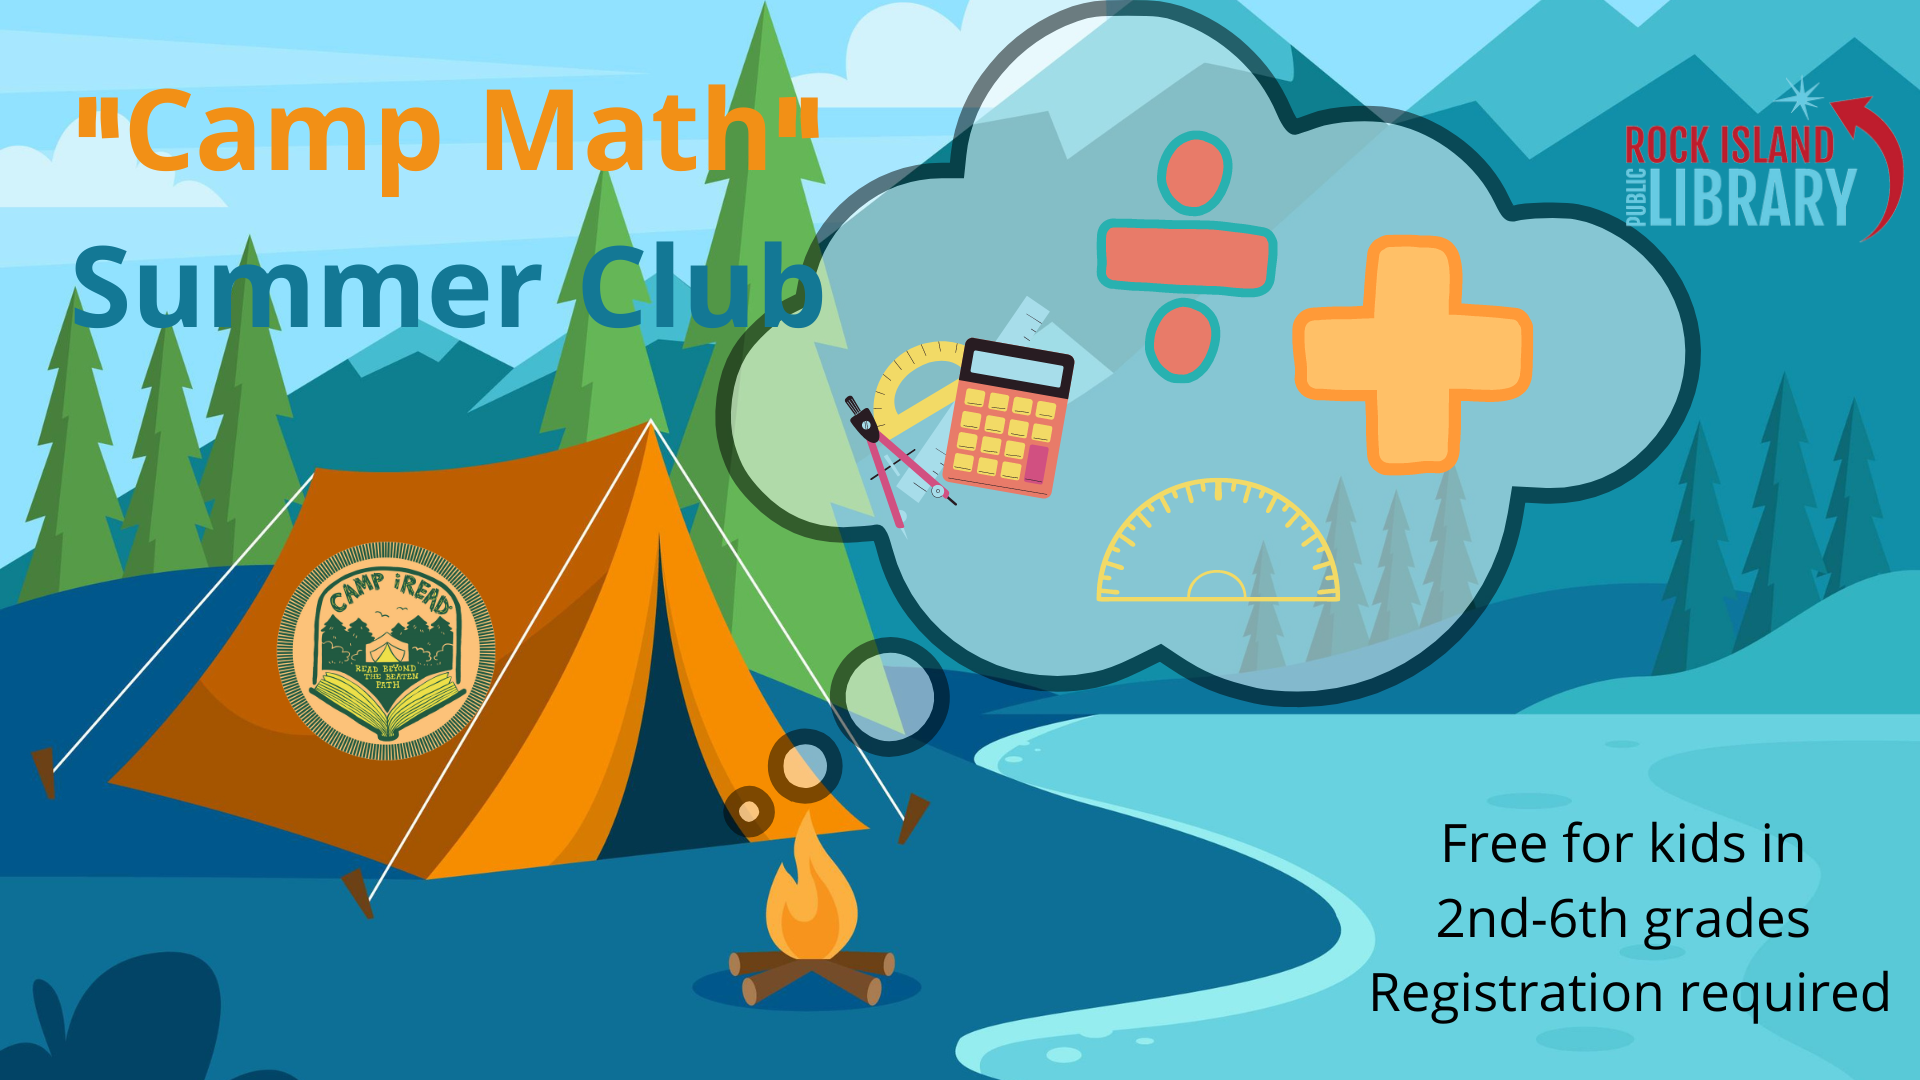 Camping scene featuring details about "camp math club" and the iRead logo. 